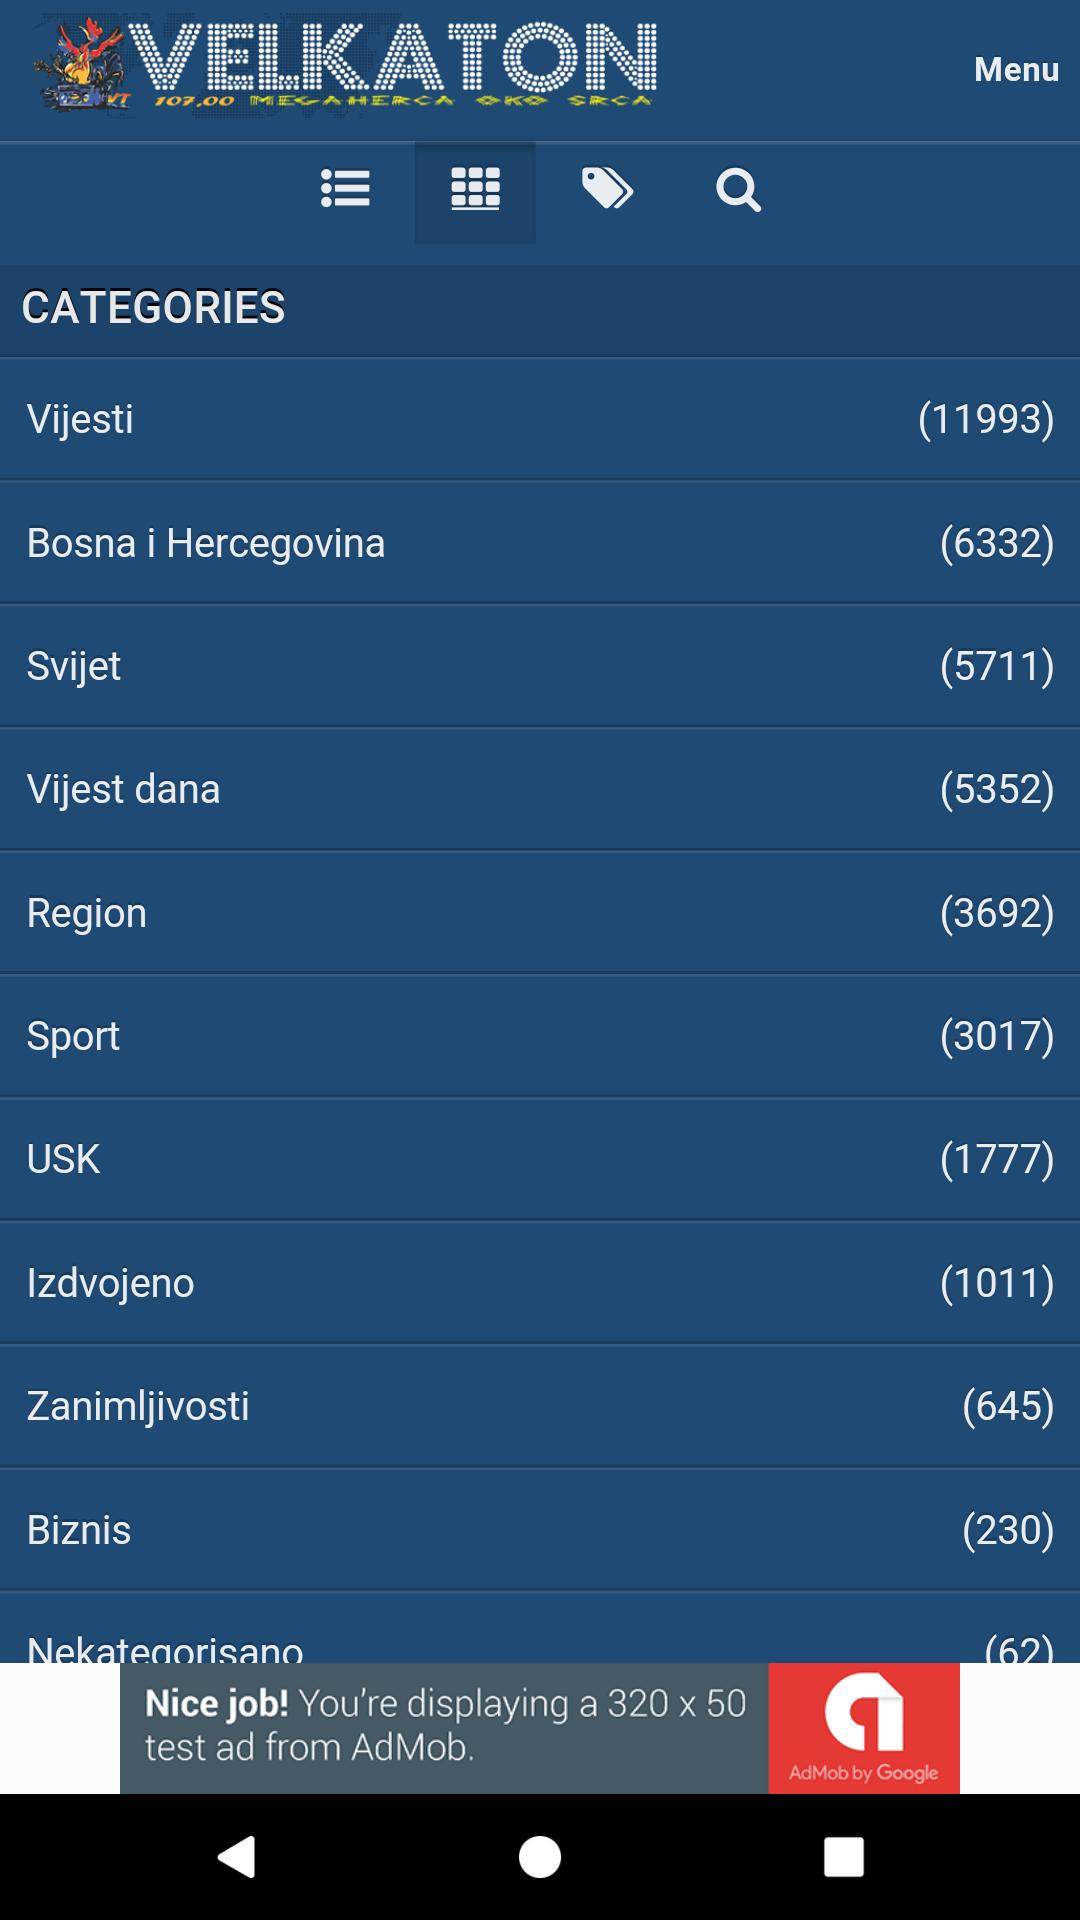 Radio Velkaton for Android - APK Download